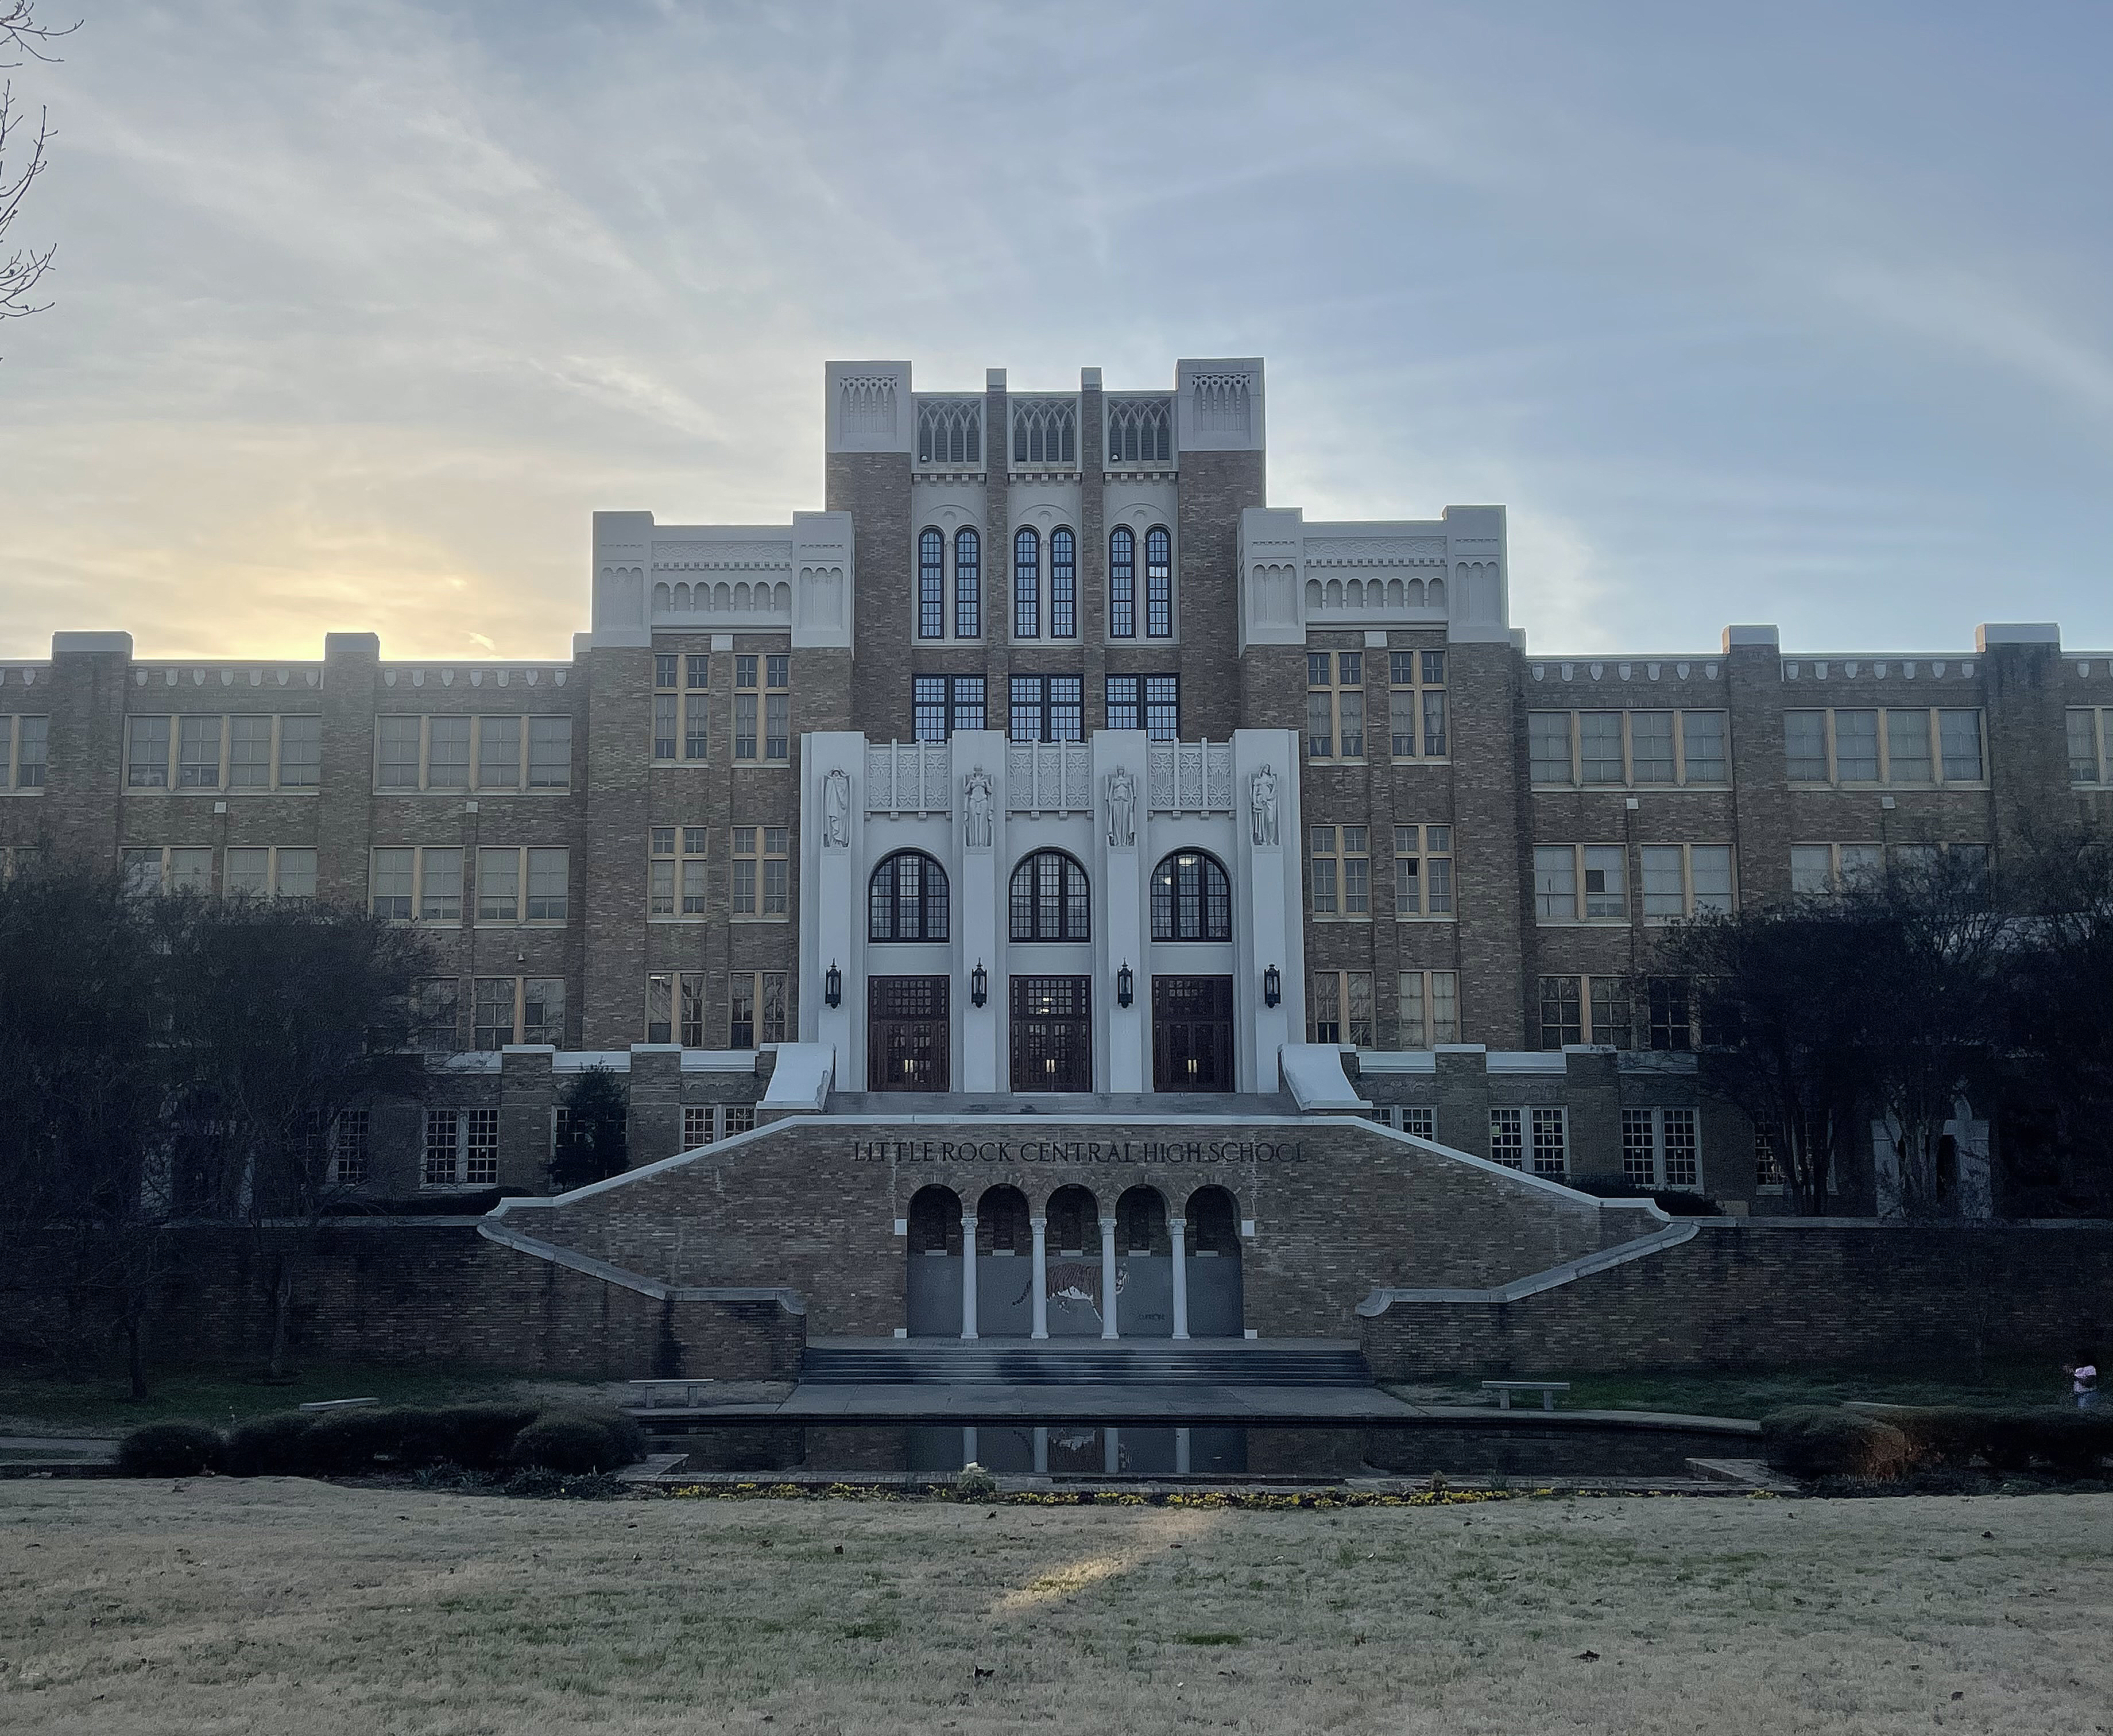 The front façade of Central High School at dusk